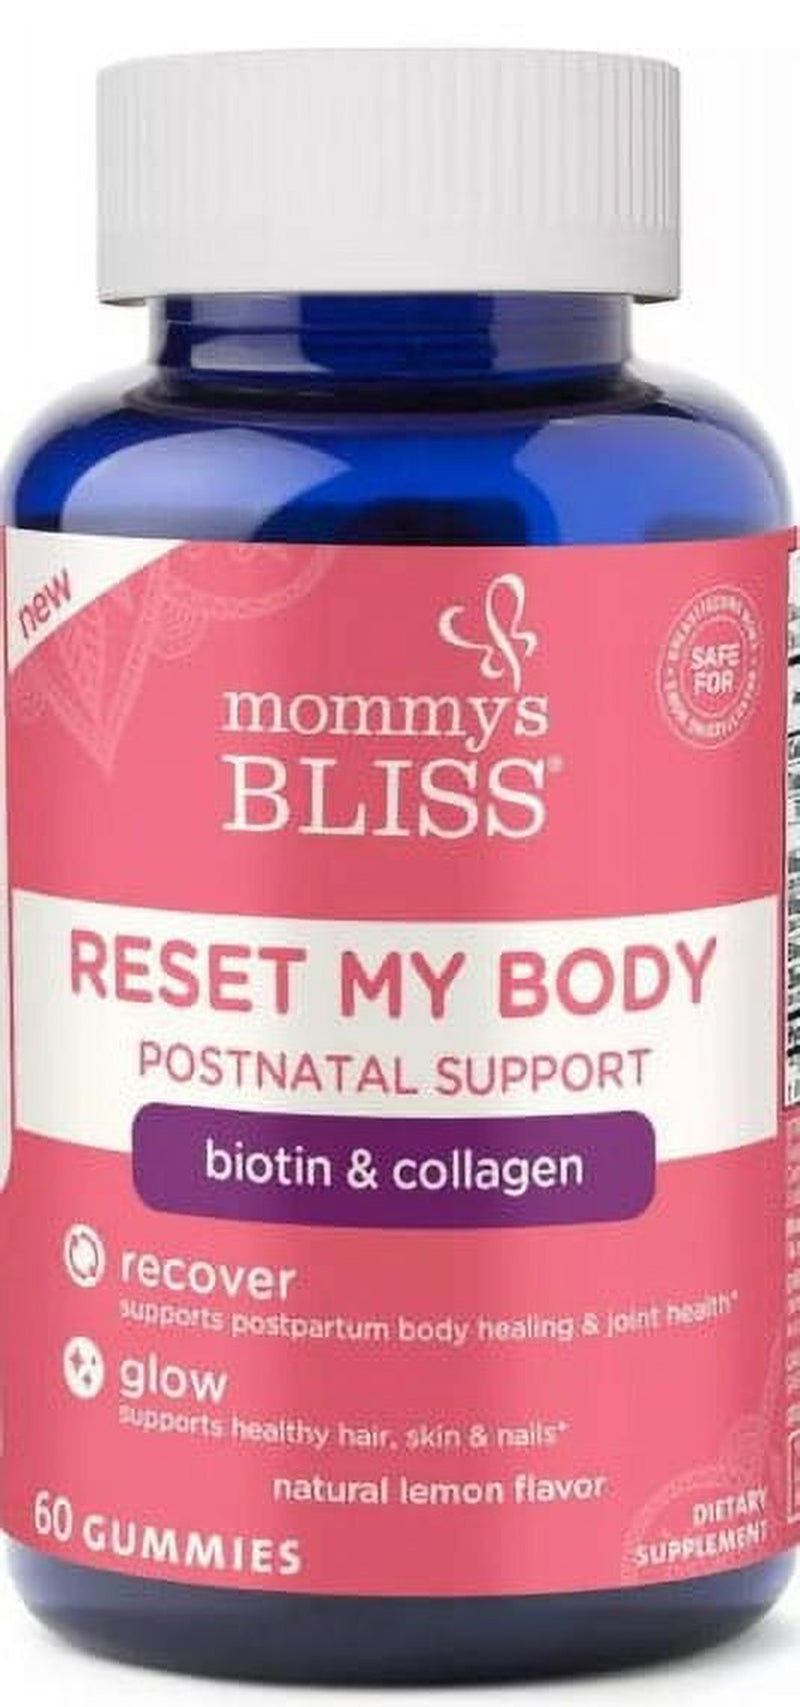 Mommy'S Bliss Reset My Body with Biotin + Collagen Gummies, Dietary Supplement, 60 Count